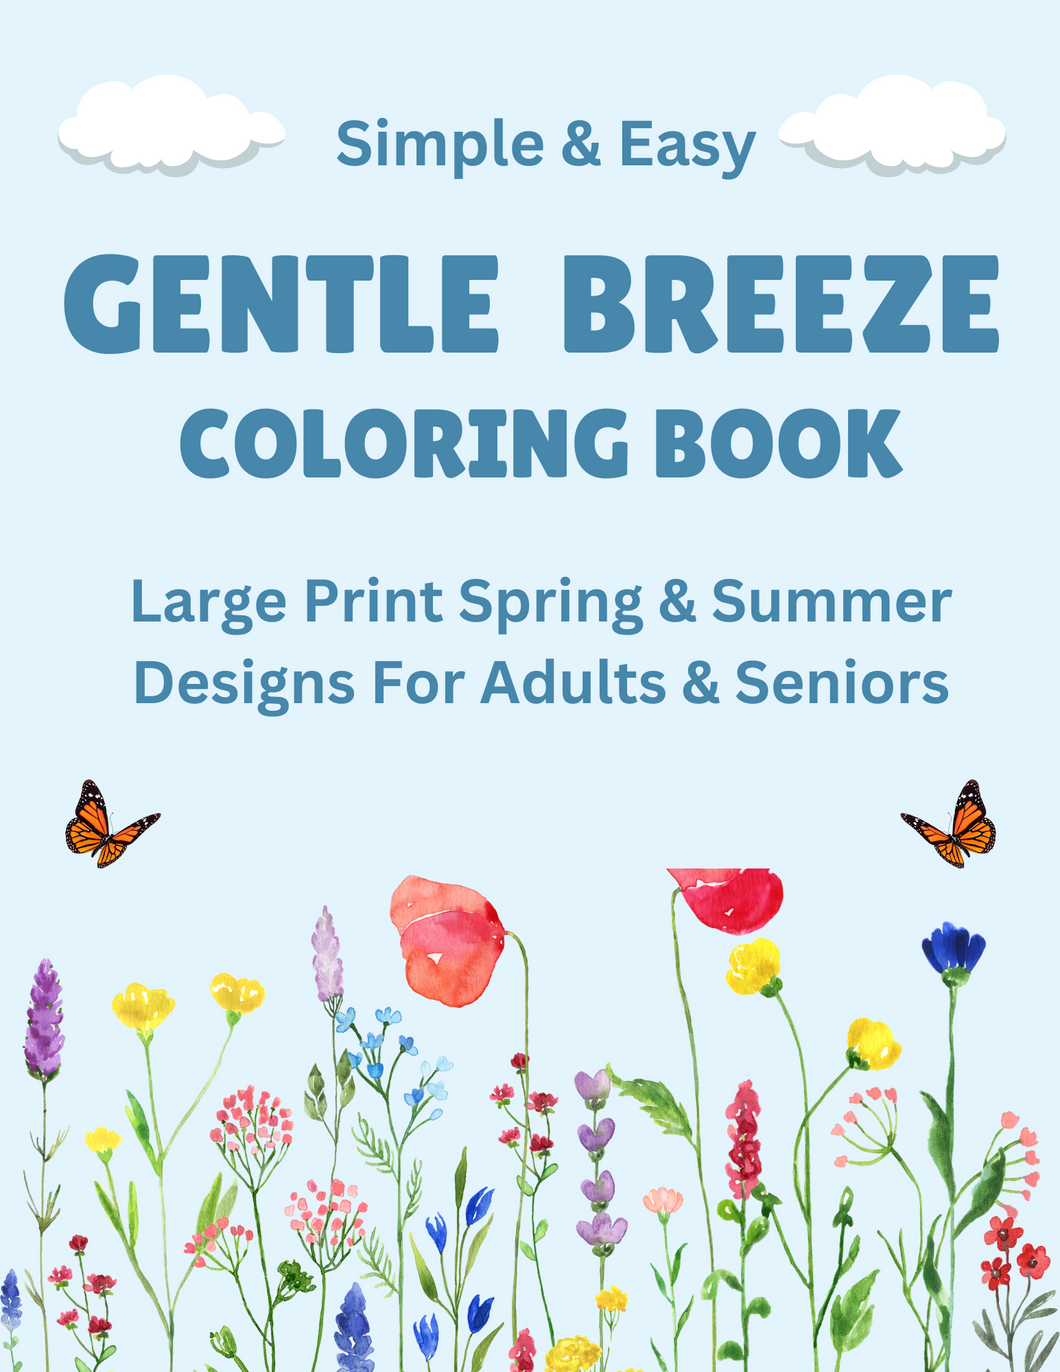 Gentle Breeze Large Print Coloring Book for Adults & Seniors